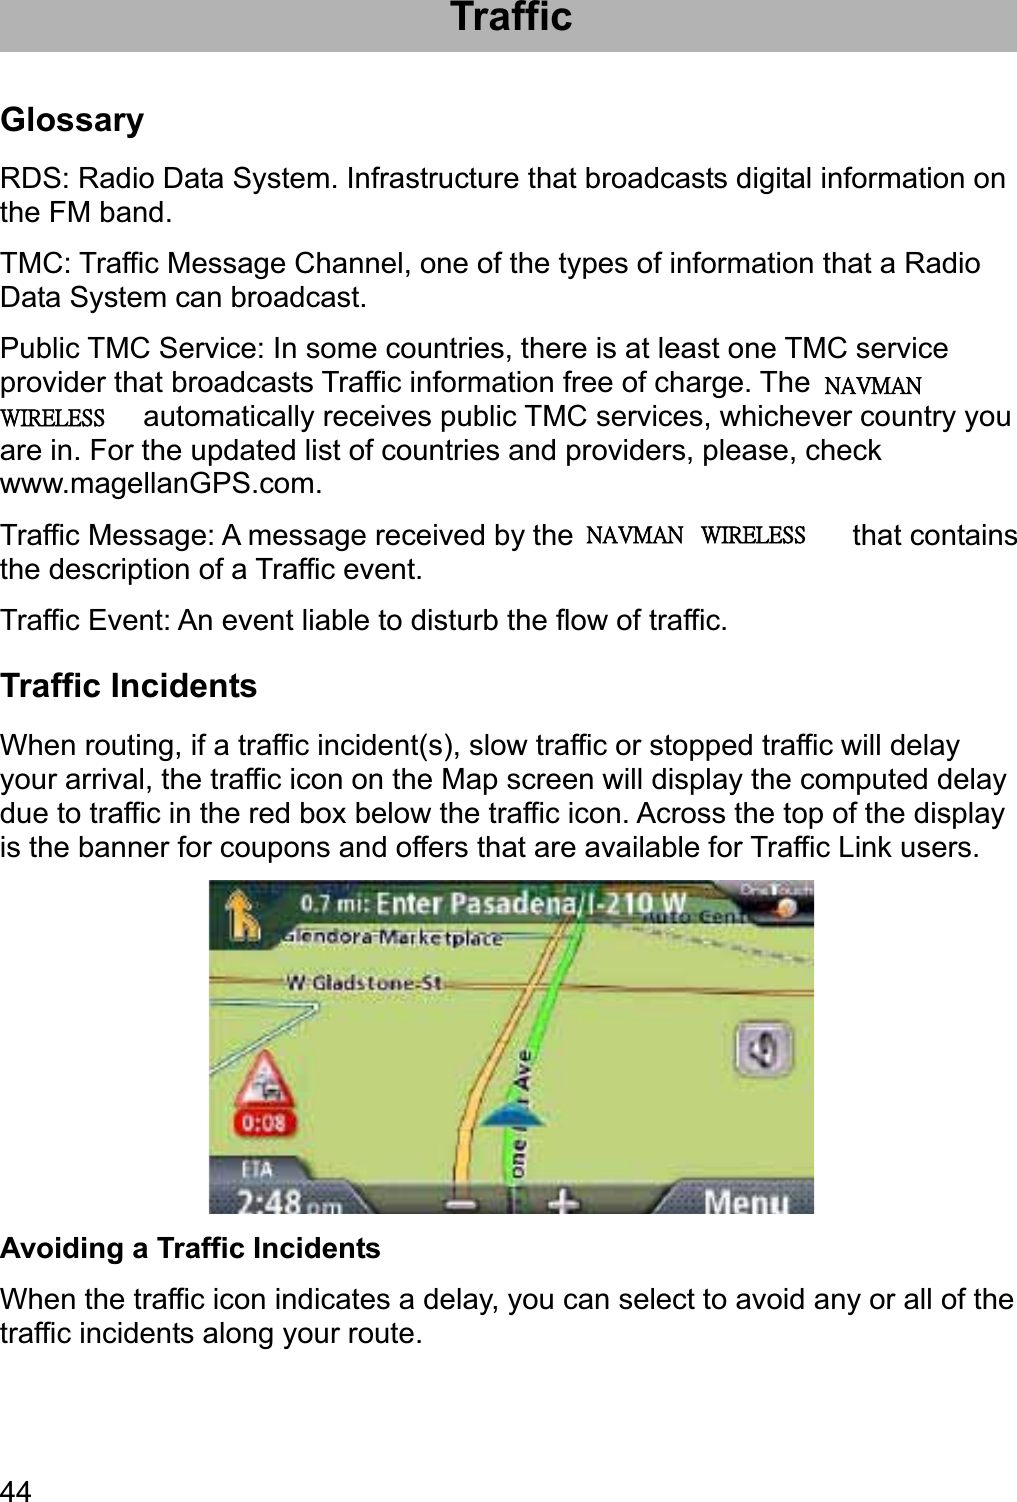 44Traffic Glossary RDS: Radio Data System. Infrastructure that broadcasts digital information on the FM band. TMC: Traffic Message Channel, one of the types of information that a Radio Data System can broadcast. Public TMC Service: In some countries, there is at least one TMC service provider that broadcasts Traffic information free of charge. The Magellan RoadMate automatically receives public TMC services, whichever country you are in. For the updated list of countries and providers, please, check www.magellanGPS.com. Traffic Message: A message received by the Magellan RoadMate that contains the description of a Traffic event. Traffic Event: An event liable to disturb the flow of traffic. Traffic Incidents When routing, if a traffic incident(s), slow traffic or stopped traffic will delay your arrival, the traffic icon on the Map screen will display the computed delay due to traffic in the red box below the traffic icon. Across the top of the display is the banner for coupons and offers that are available for Traffic Link users. Avoiding a Traffic Incidents When the traffic icon indicates a delay, you can select to avoid any or all of the traffic incidents along your route. ʳʳˡ˔˩ˠ˔ˡʳʳʳ˪˜˥˘˟˘˦˦ˡ˔˩ˠ˔ˡʳʳʳ˪˜˥˘˟˘˦˦